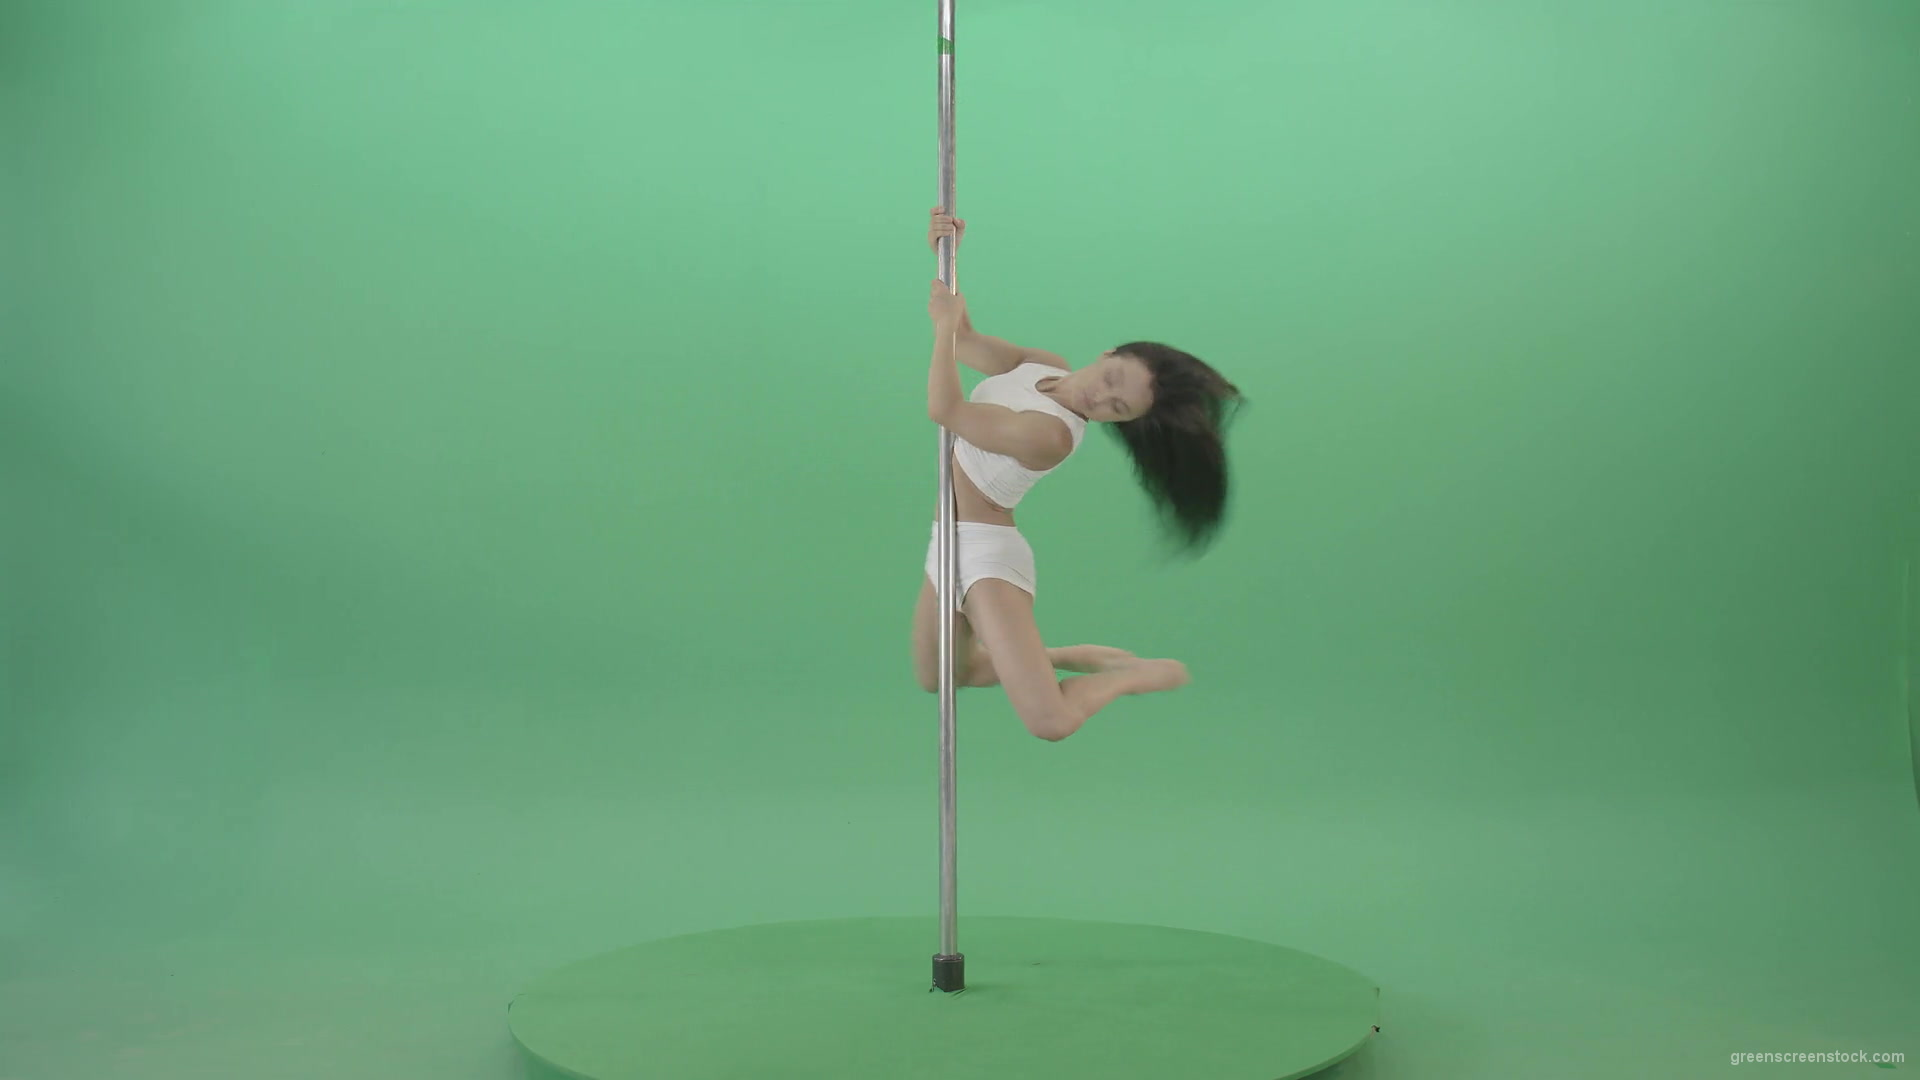 Green-Screen-Woman-spinning-gracefully-on-pole-dance-Video-Footage-1920_006 Green Screen Stock